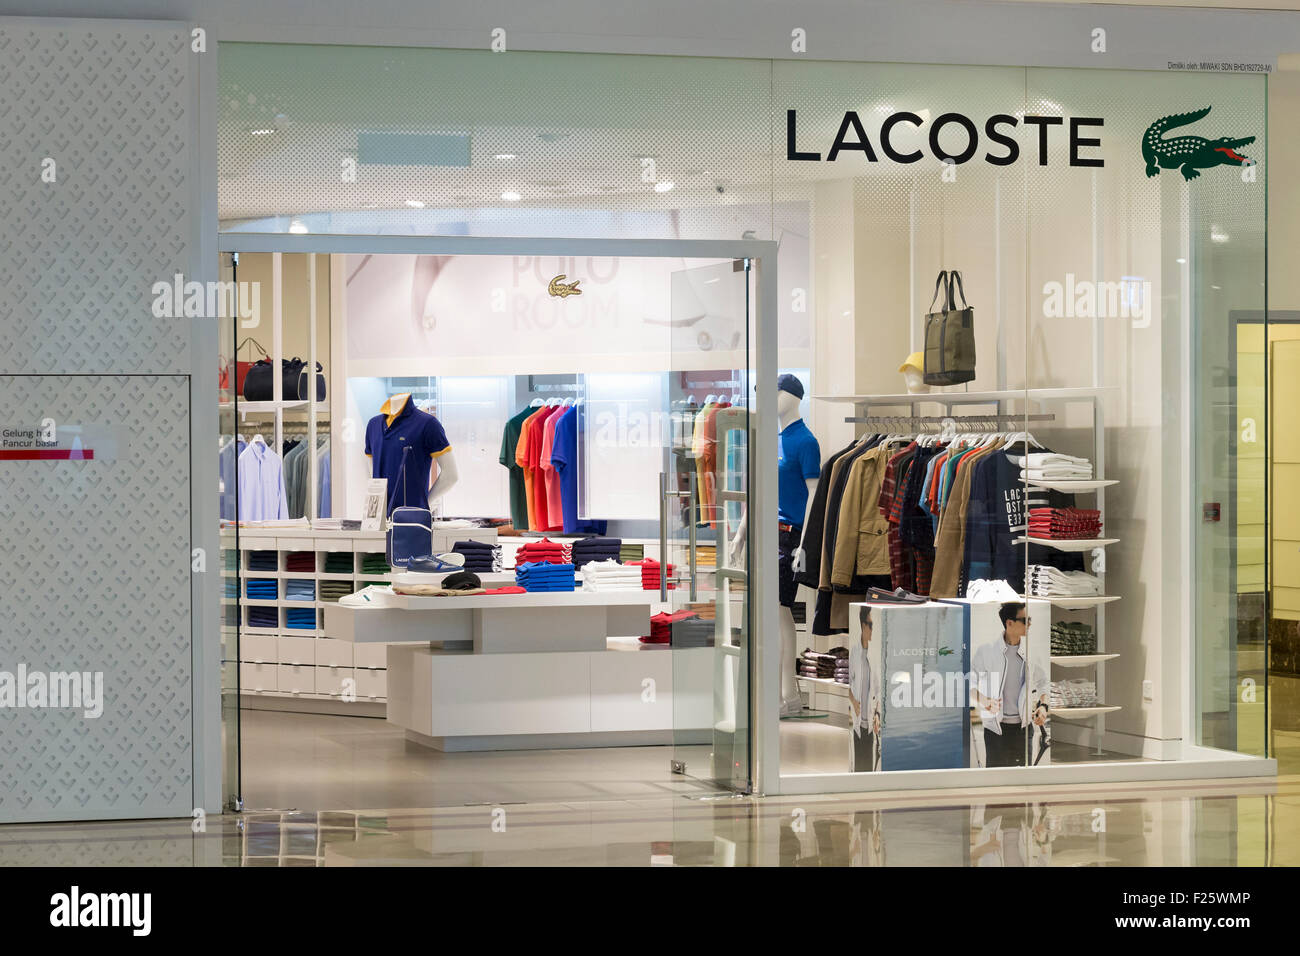 lacoste shopping